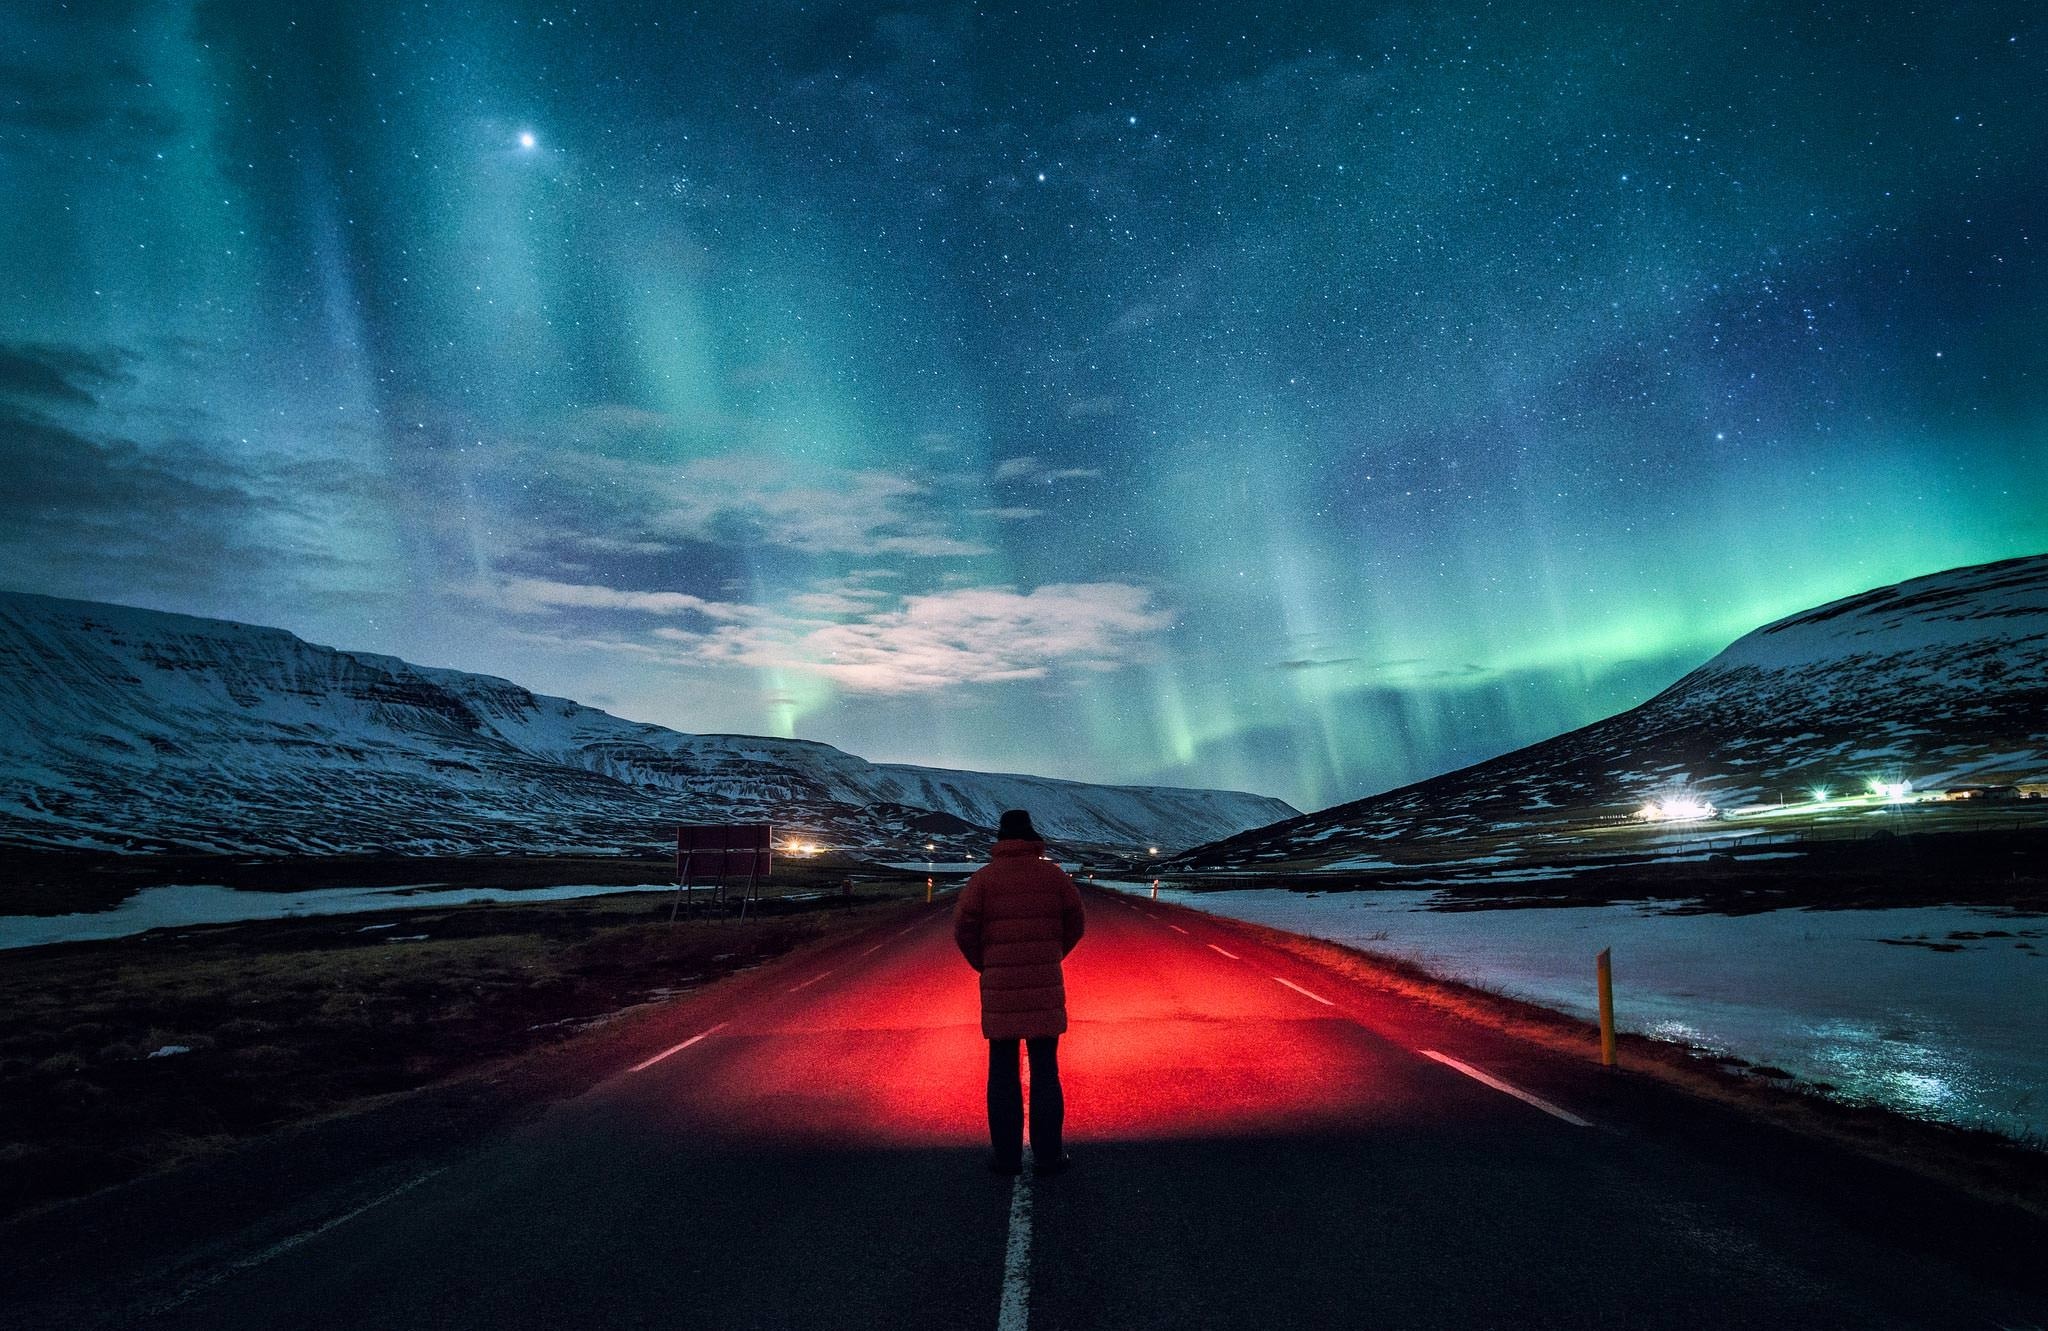 General 2048x1331 landscape photography nature starry night mountains snow road storm lights winter sky cyan red asphalt low light outdoors